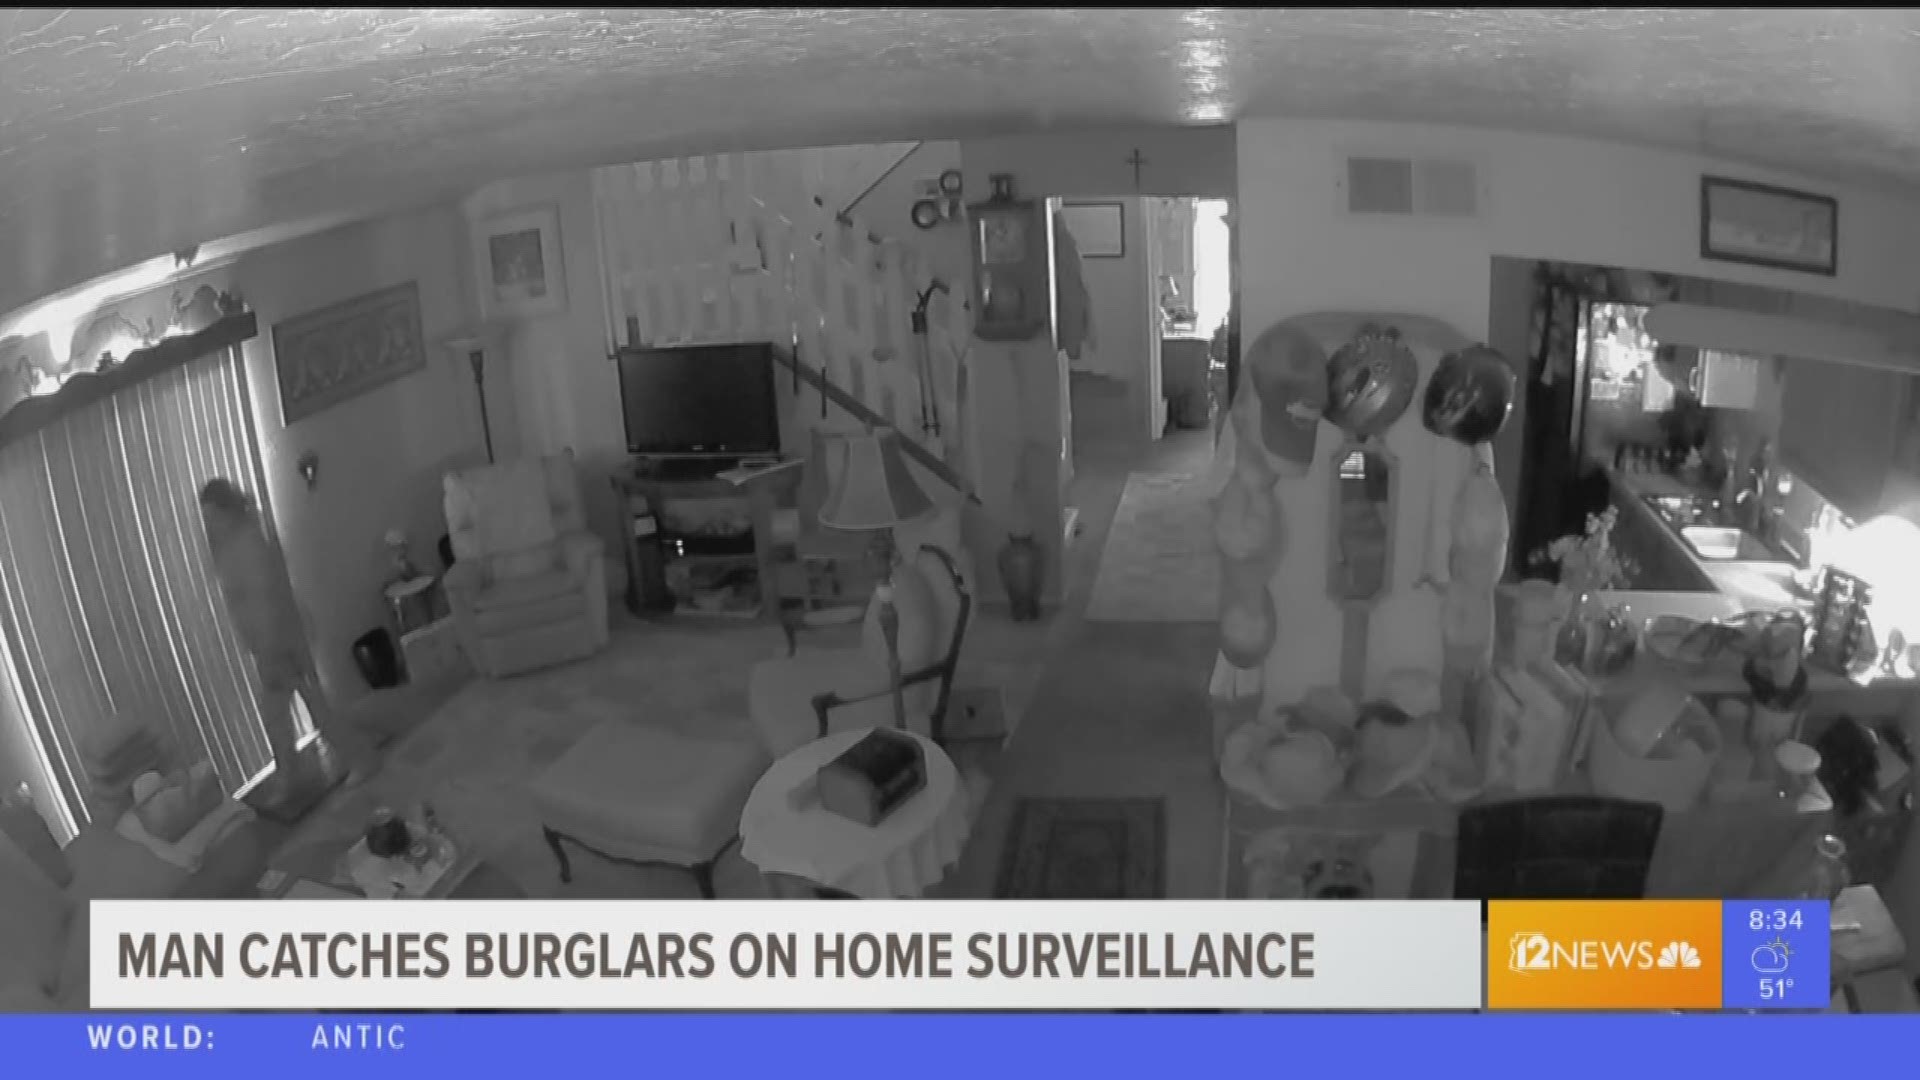 The Glendale man was in Chicago when he got a security alert on his phone that showed video of two women ransacking his home who ended up being his neighbors. He says they took jewelry, electronics, and a gun.